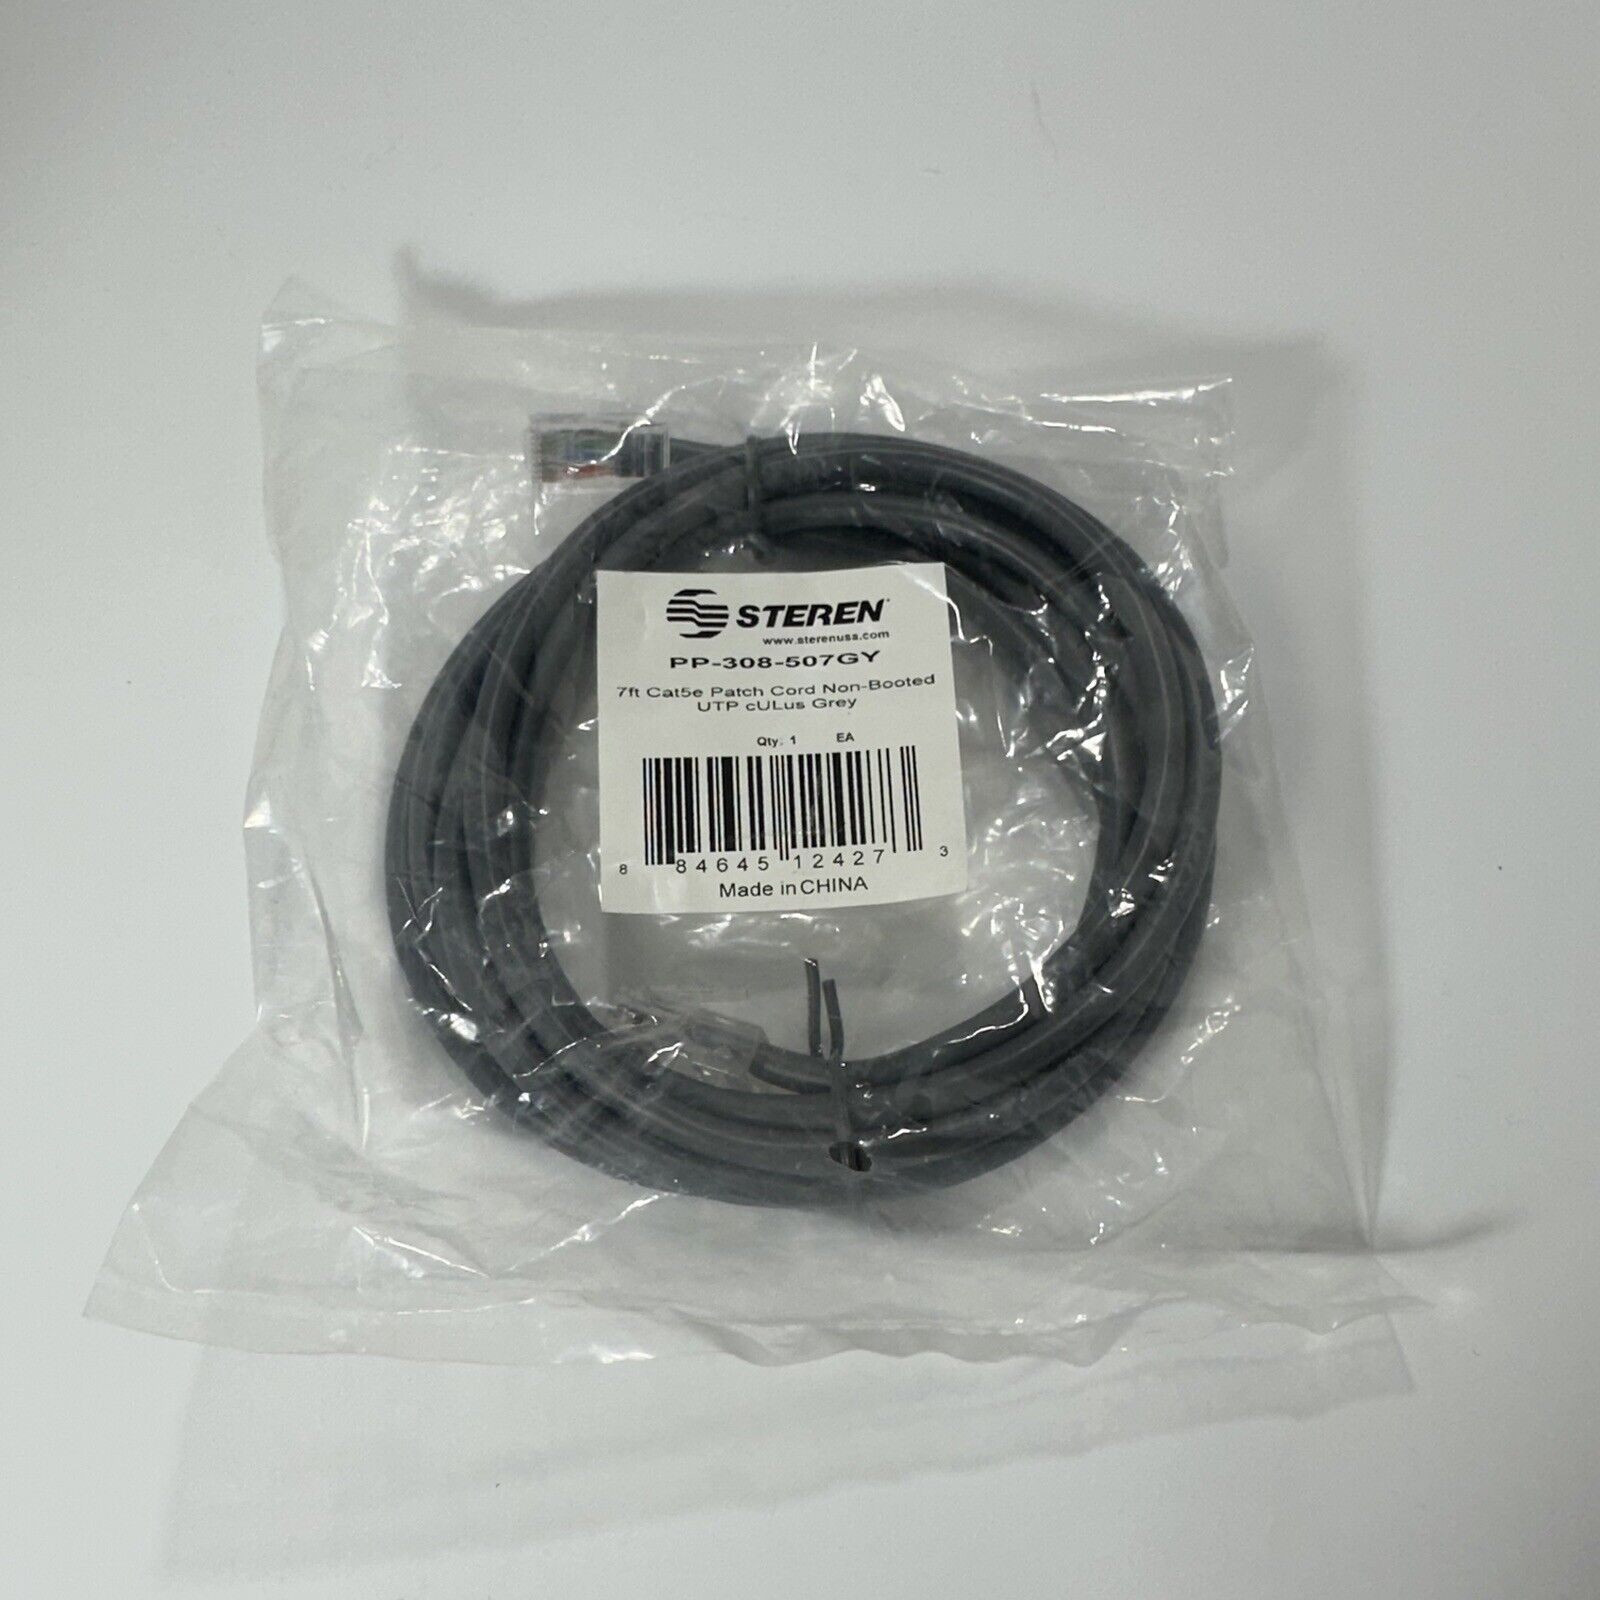 Steren 7' ft Cat5e Patch Cord Non-Booted UTP cULus Gray PP-308-507GY